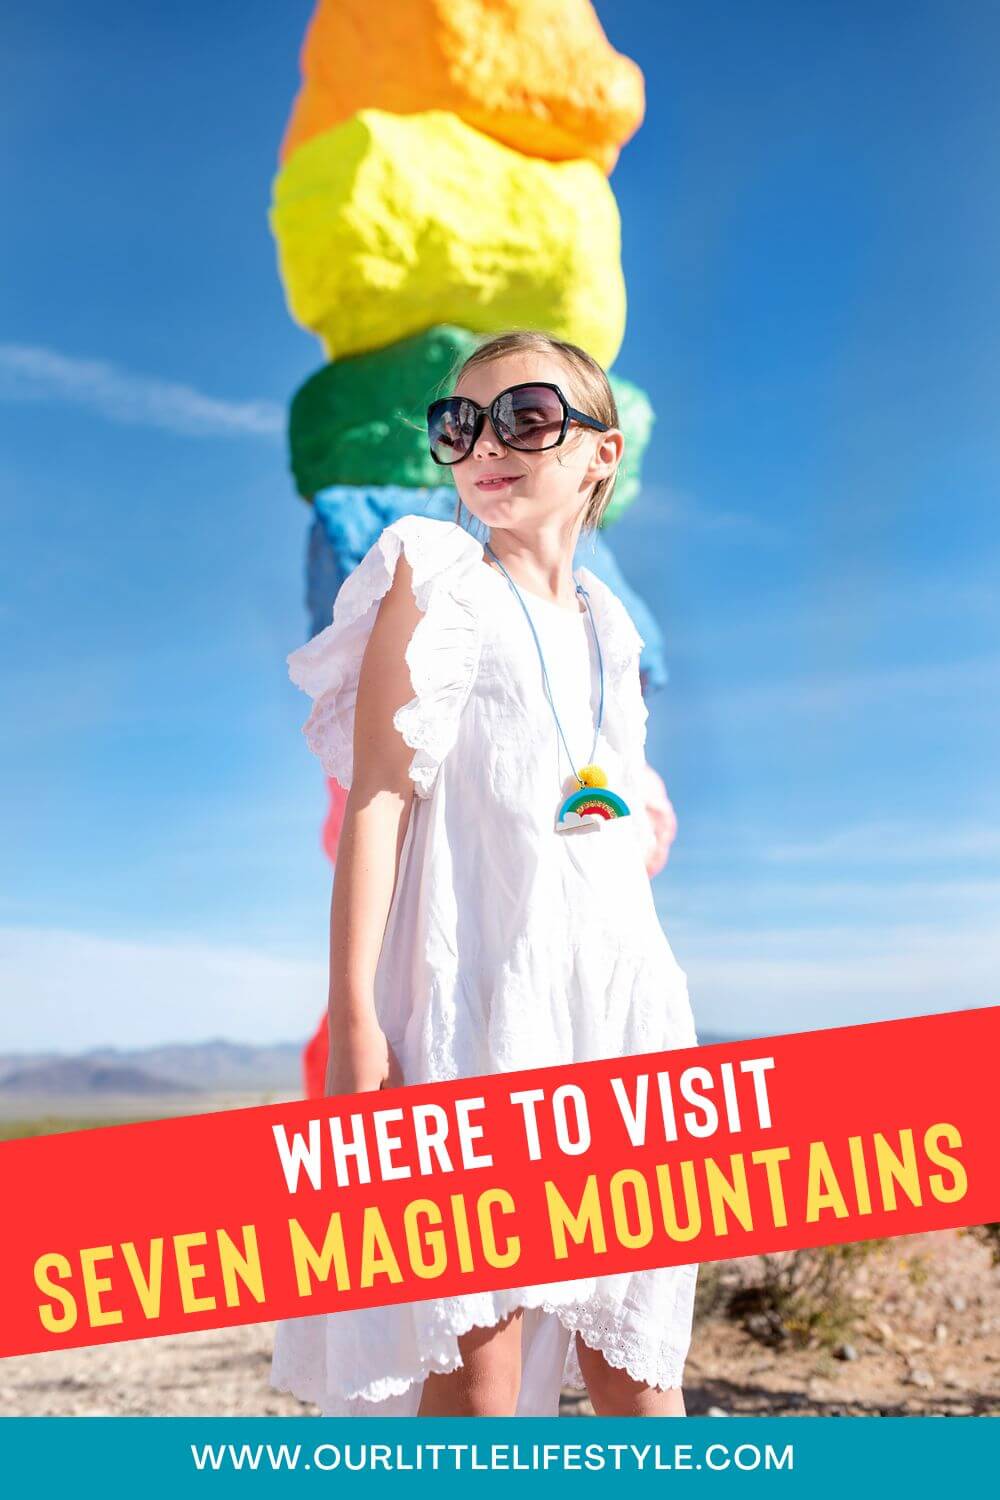 How To Visit 7 Magic Mountain